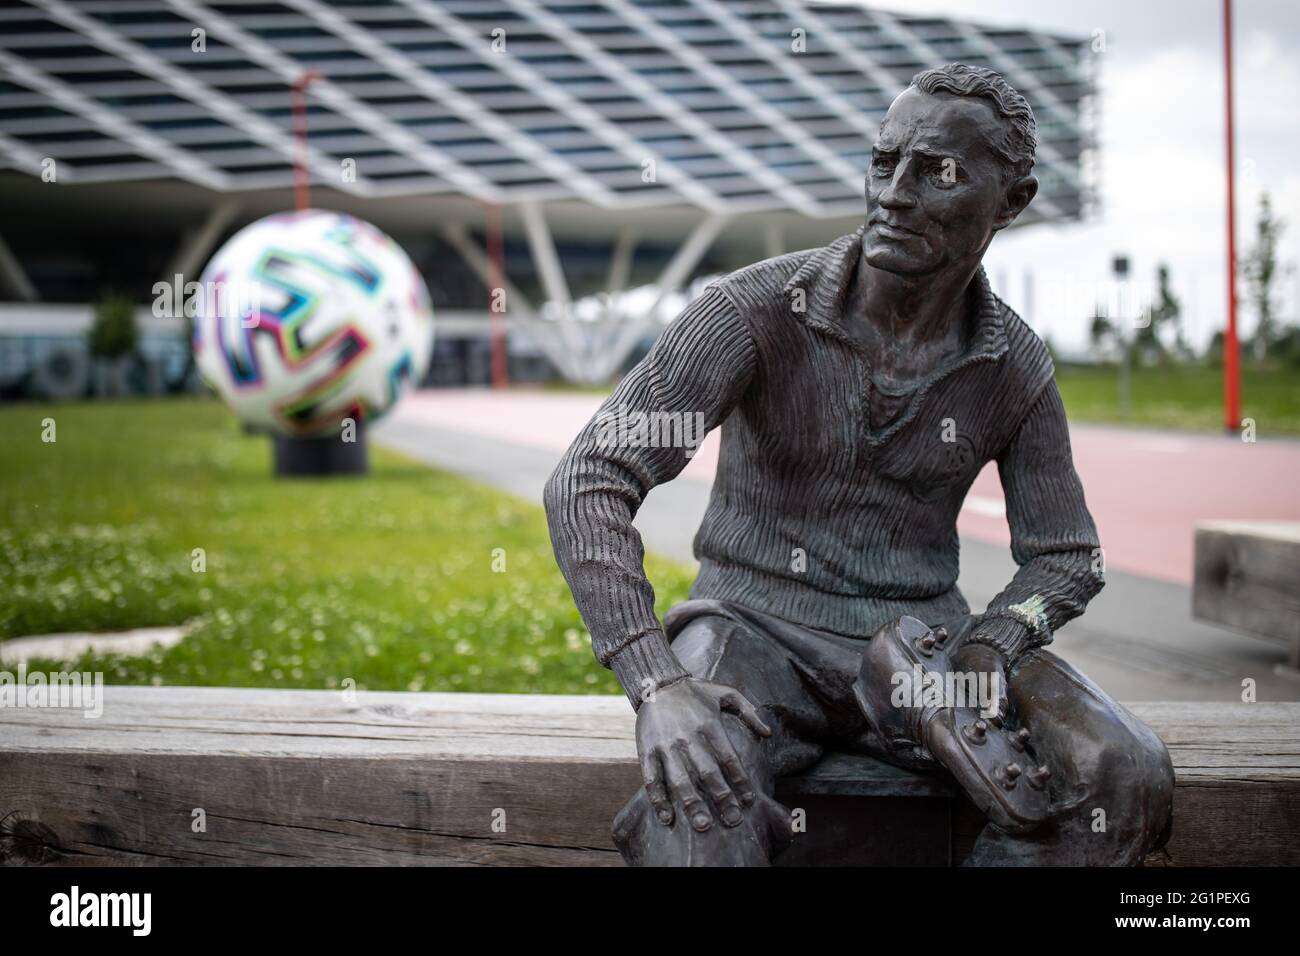 Herzogenaurach, Germany. 07th June, 2021. A statue of founder Adolf "Adi"  Dassler has been erected in front of the "Arena" office building on the  grounds of sporting goods manufacturer adidas. In the